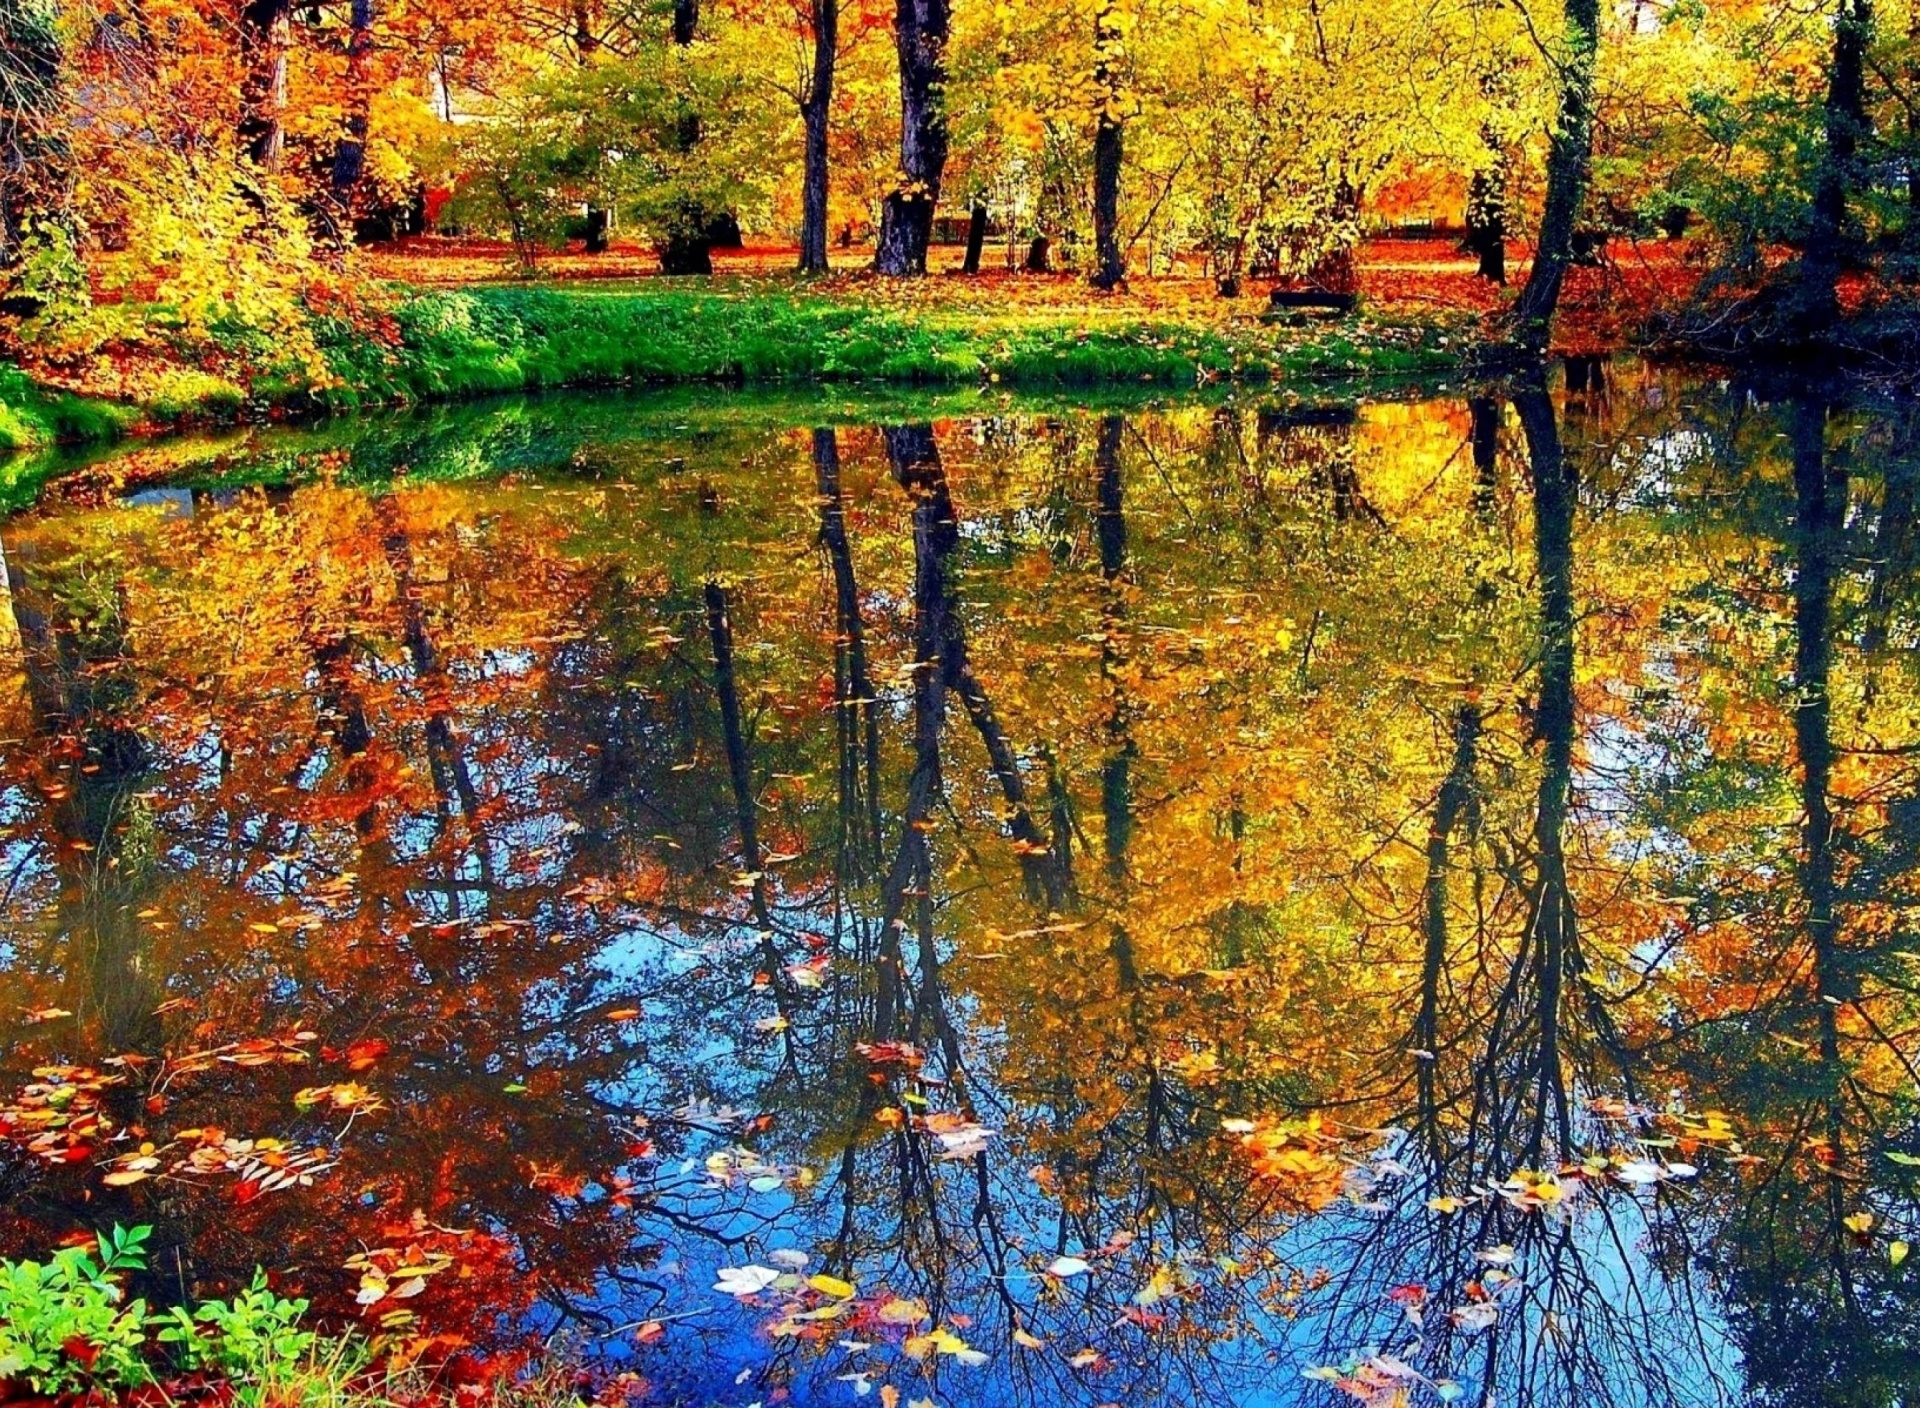 Autumn pond and leaves screenshot #1 1920x1408